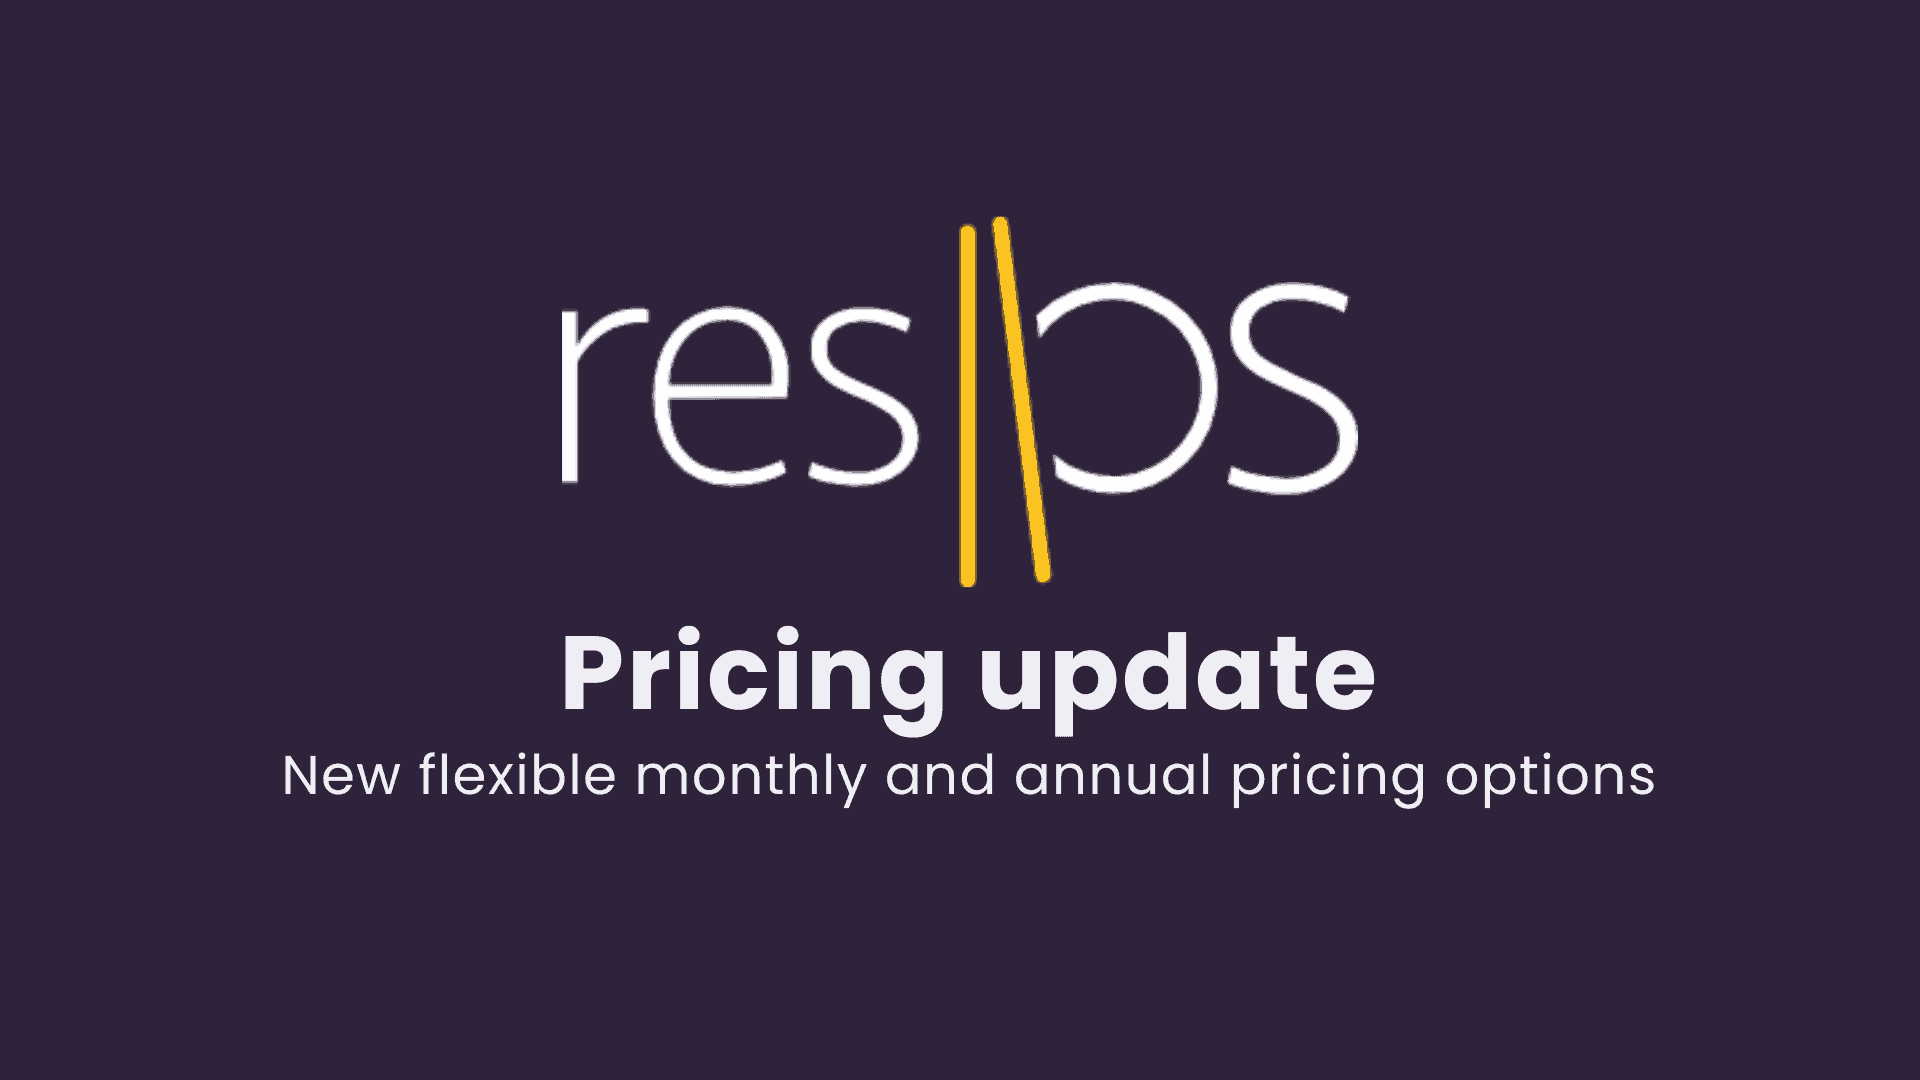 We’re changing our prices at resOS